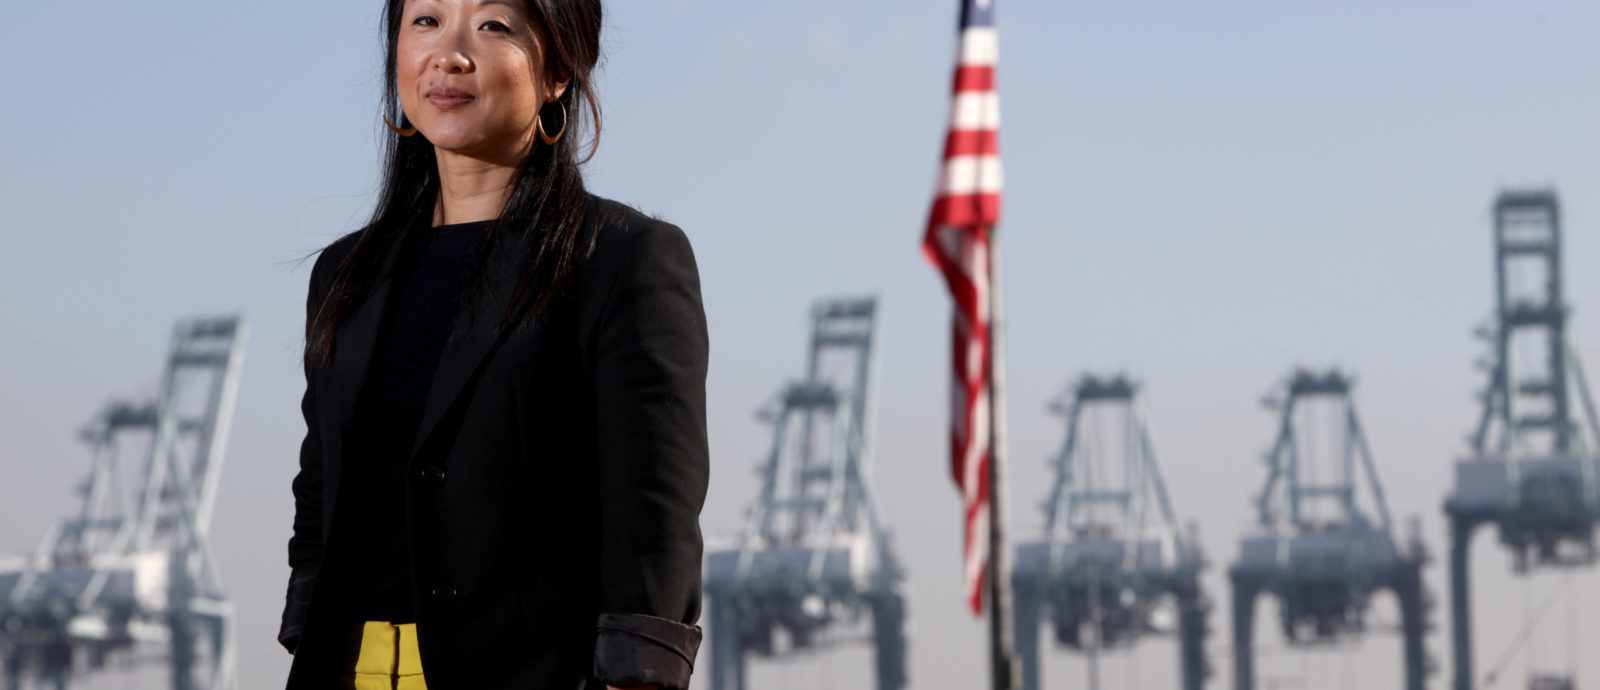 Melissa Lin Perrella in front of the Port of Los Angeles in San Pedro, California. Credit:  Ann Johansson for NRDC